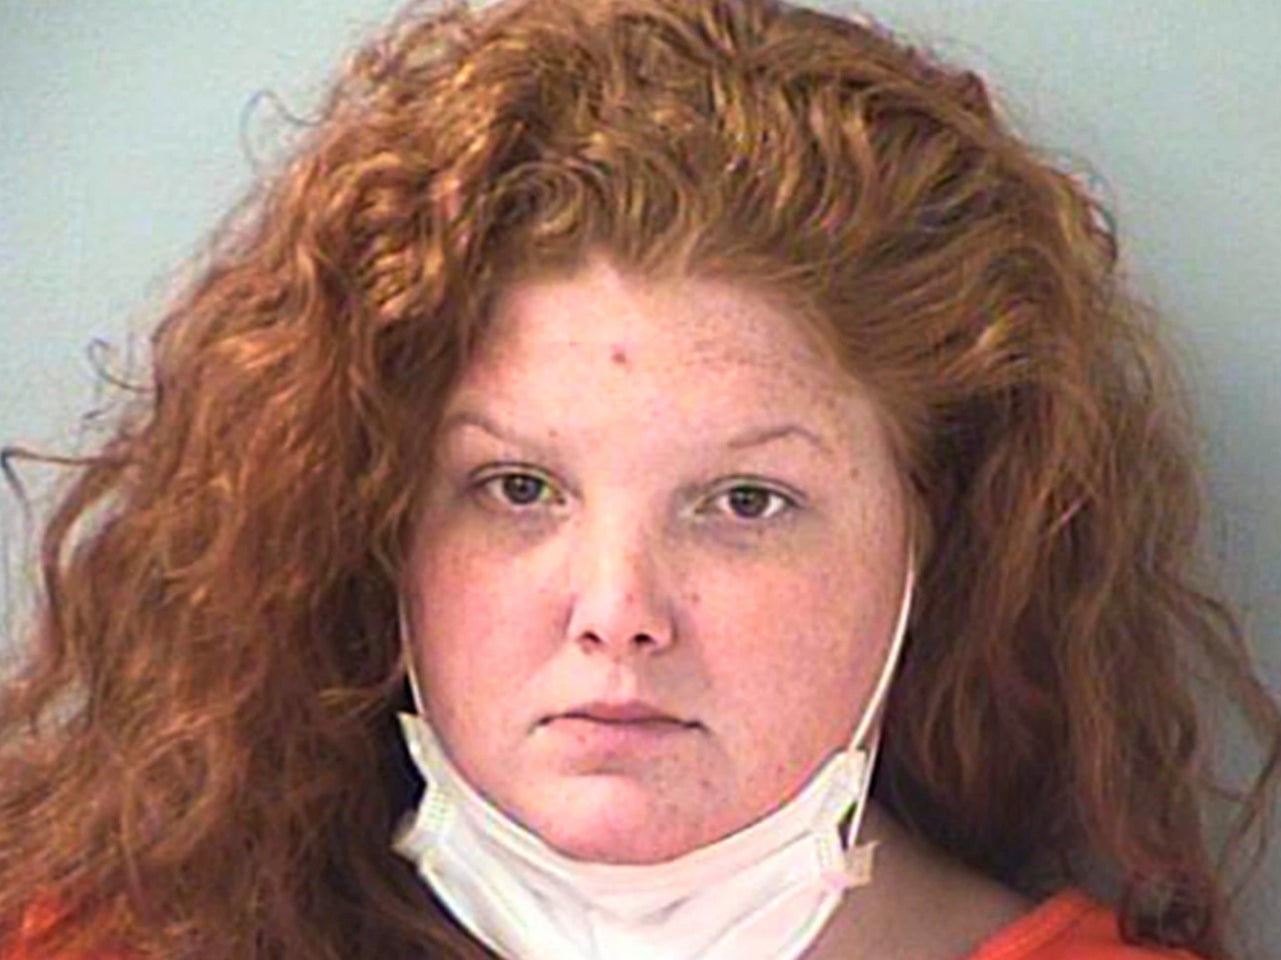 Brittany Gosney, 29, pleaded guilty to killing one of her children and abandoning two others in February.